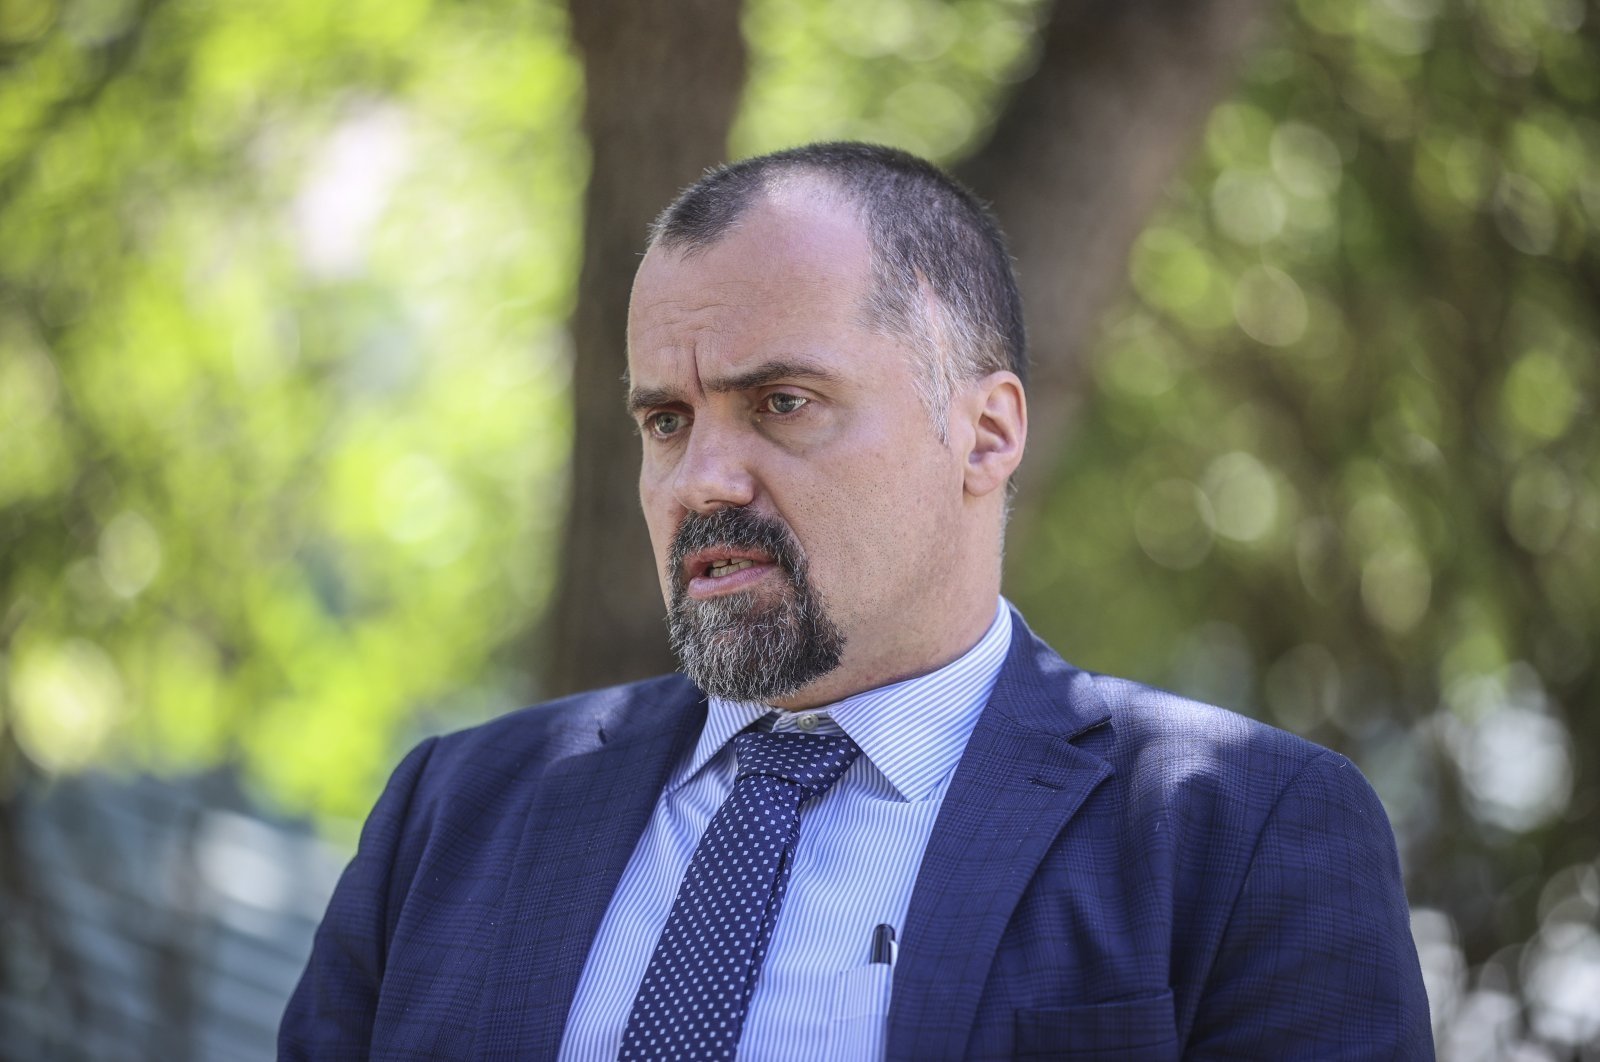 Head of the International Policy Bureau of the President of the Republic of Poland, Jakub Kumoch, during an interview while he was ambassador to Turkey, Ankara, Turkey, July 13, 2021. (AA Photo)